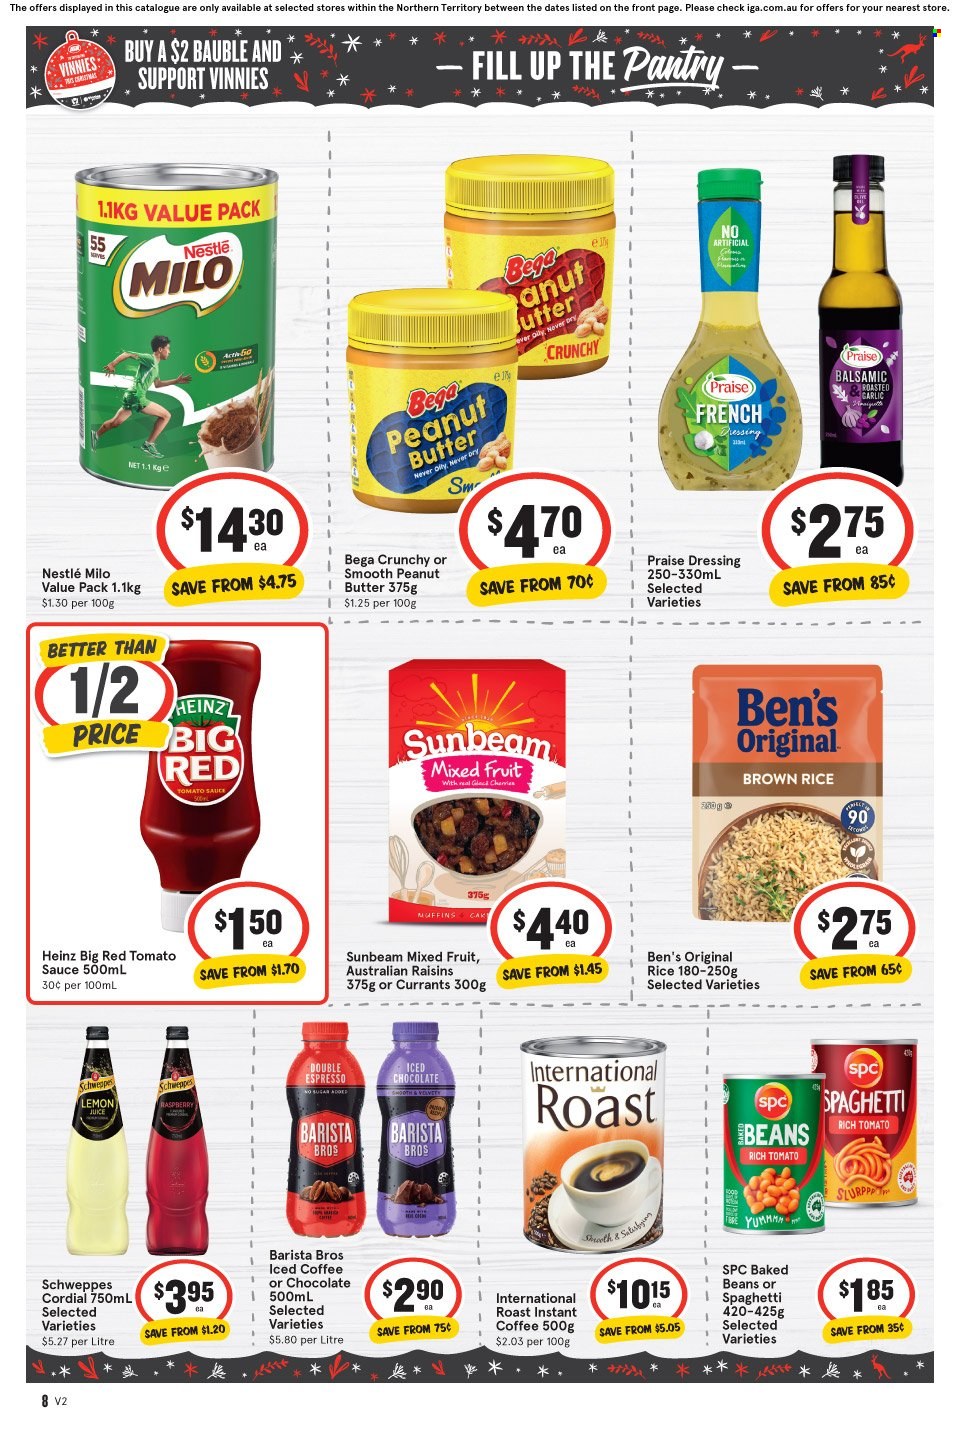 thumbnail - IGA Catalogue - 30 Nov 2022 - 6 Dec 2022 - Sales products - cake, muffin, cherries, sauce, Milo, Nestlé, chocolate, tomato sauce, Heinz, baked beans, brown rice, rice, french dressing, dressing, currants, raisins, dried fruit, Schweppes, lemon juice, iced coffee, instant coffee, bauble, Sunbeam. Page 9.